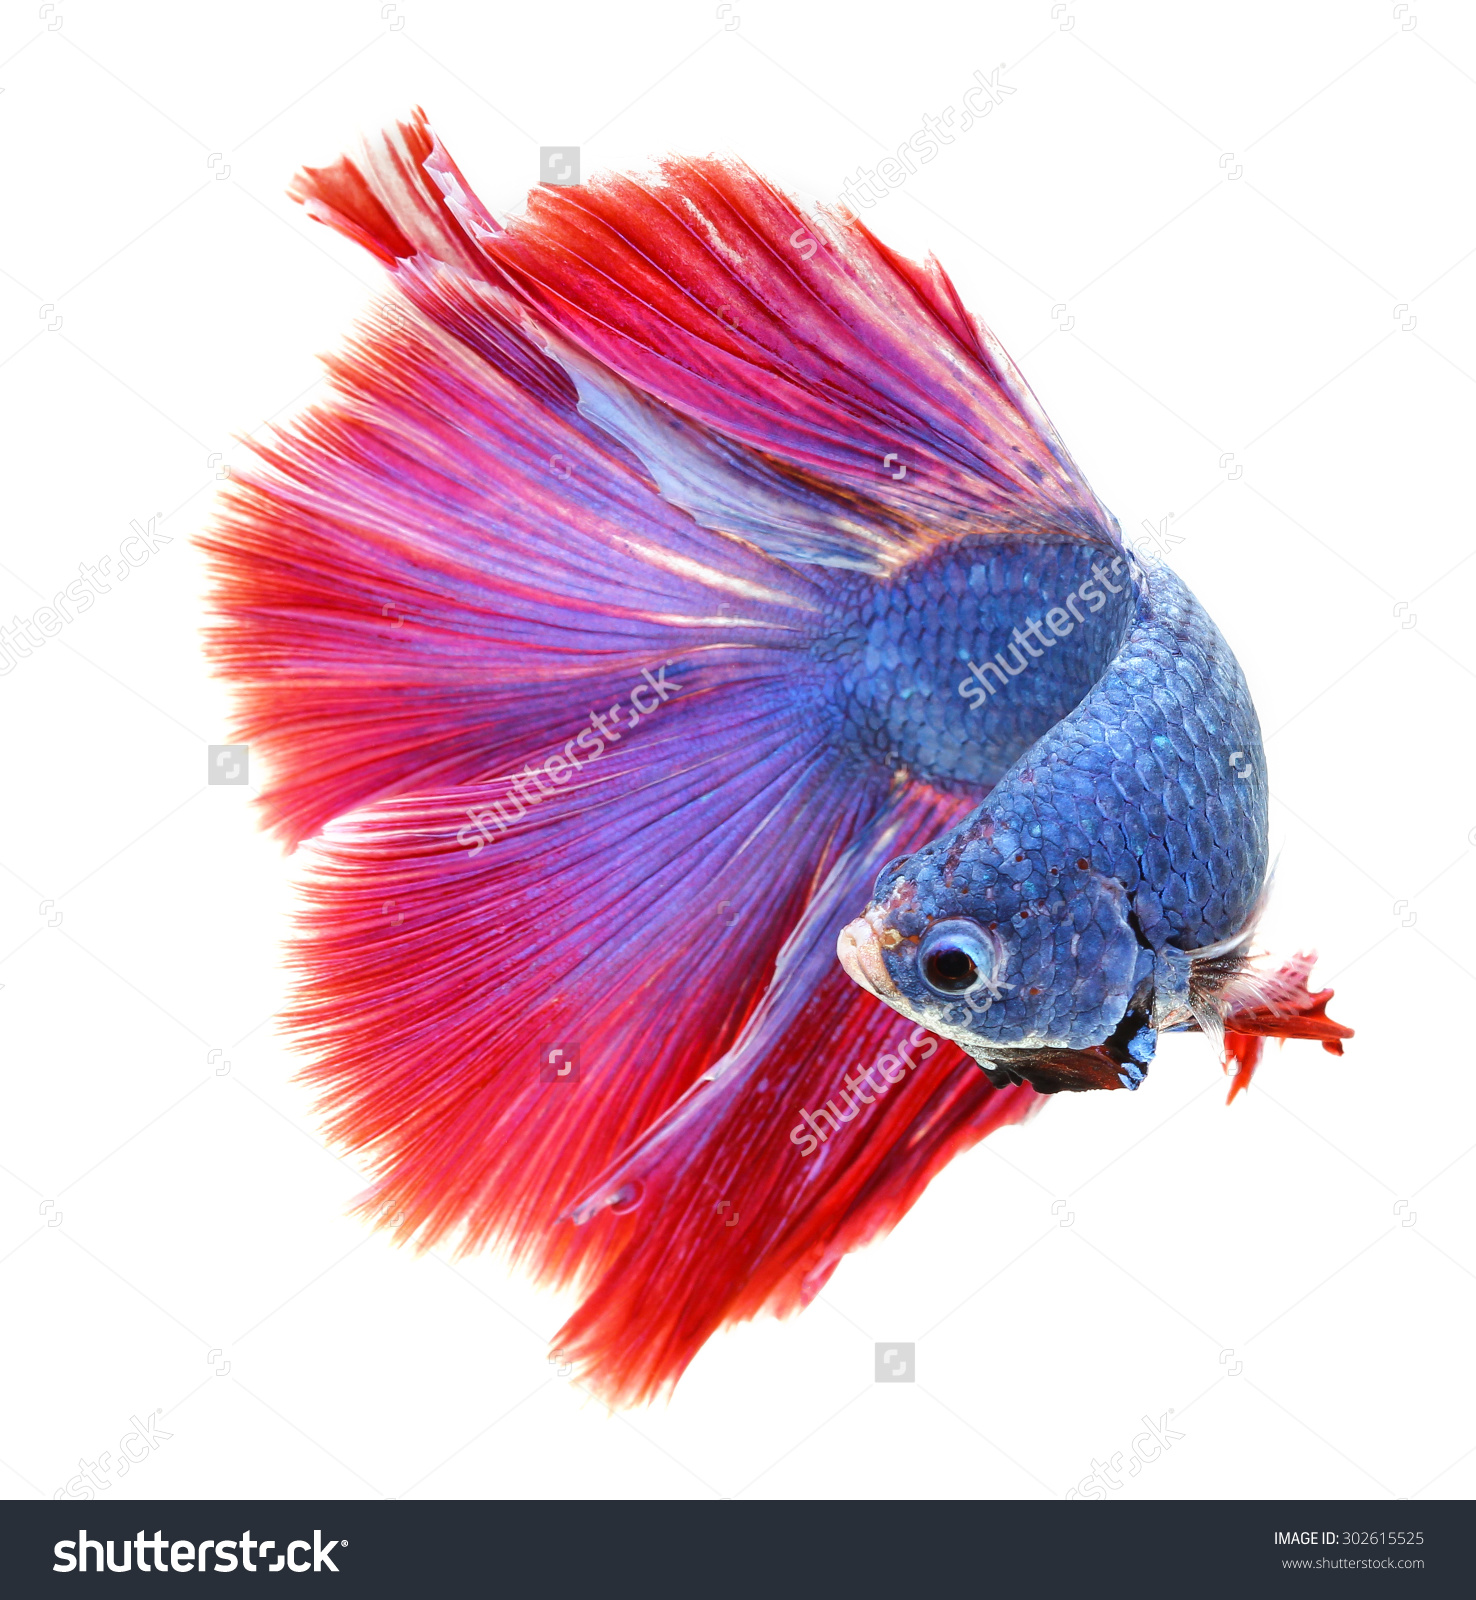 Siamese Fighting Fish svg #12, Download drawings